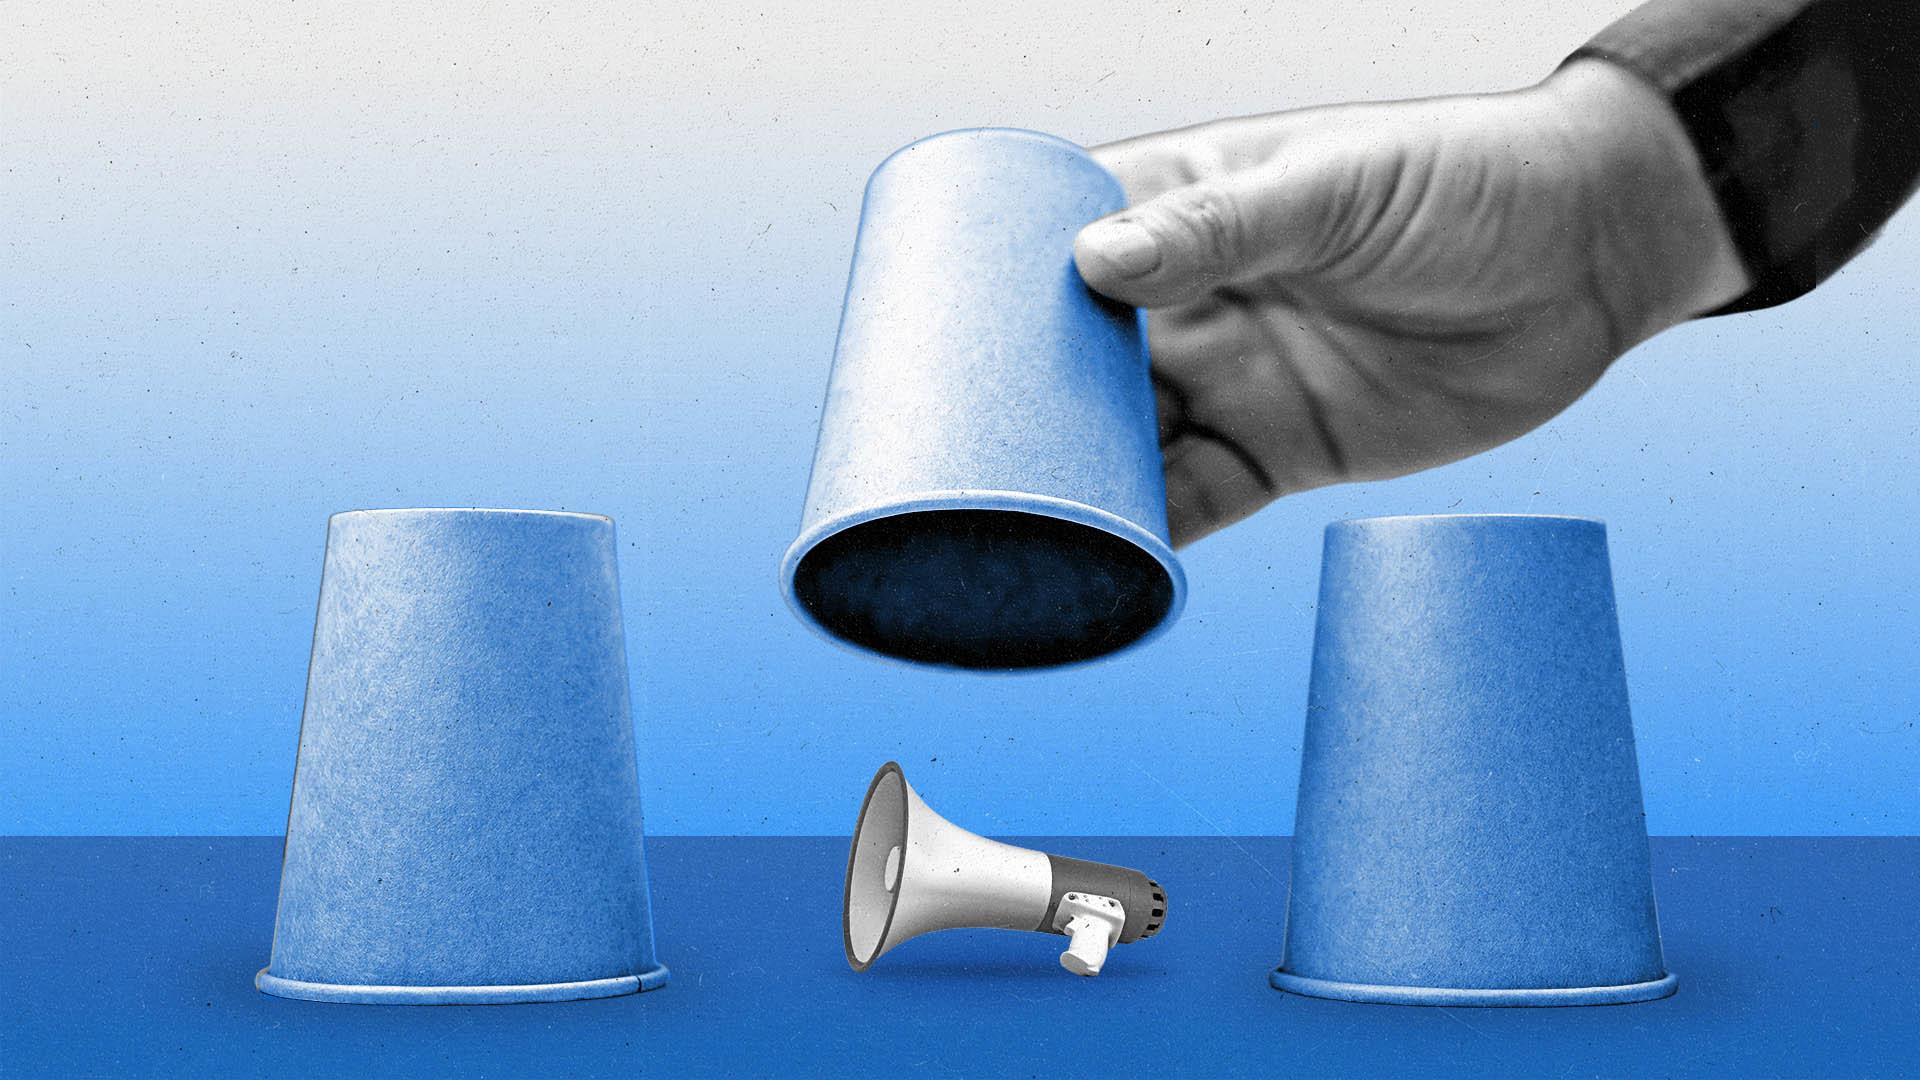 3 cups upside down on a surface, with a hand lifting the middle one to reveal a megaphone.